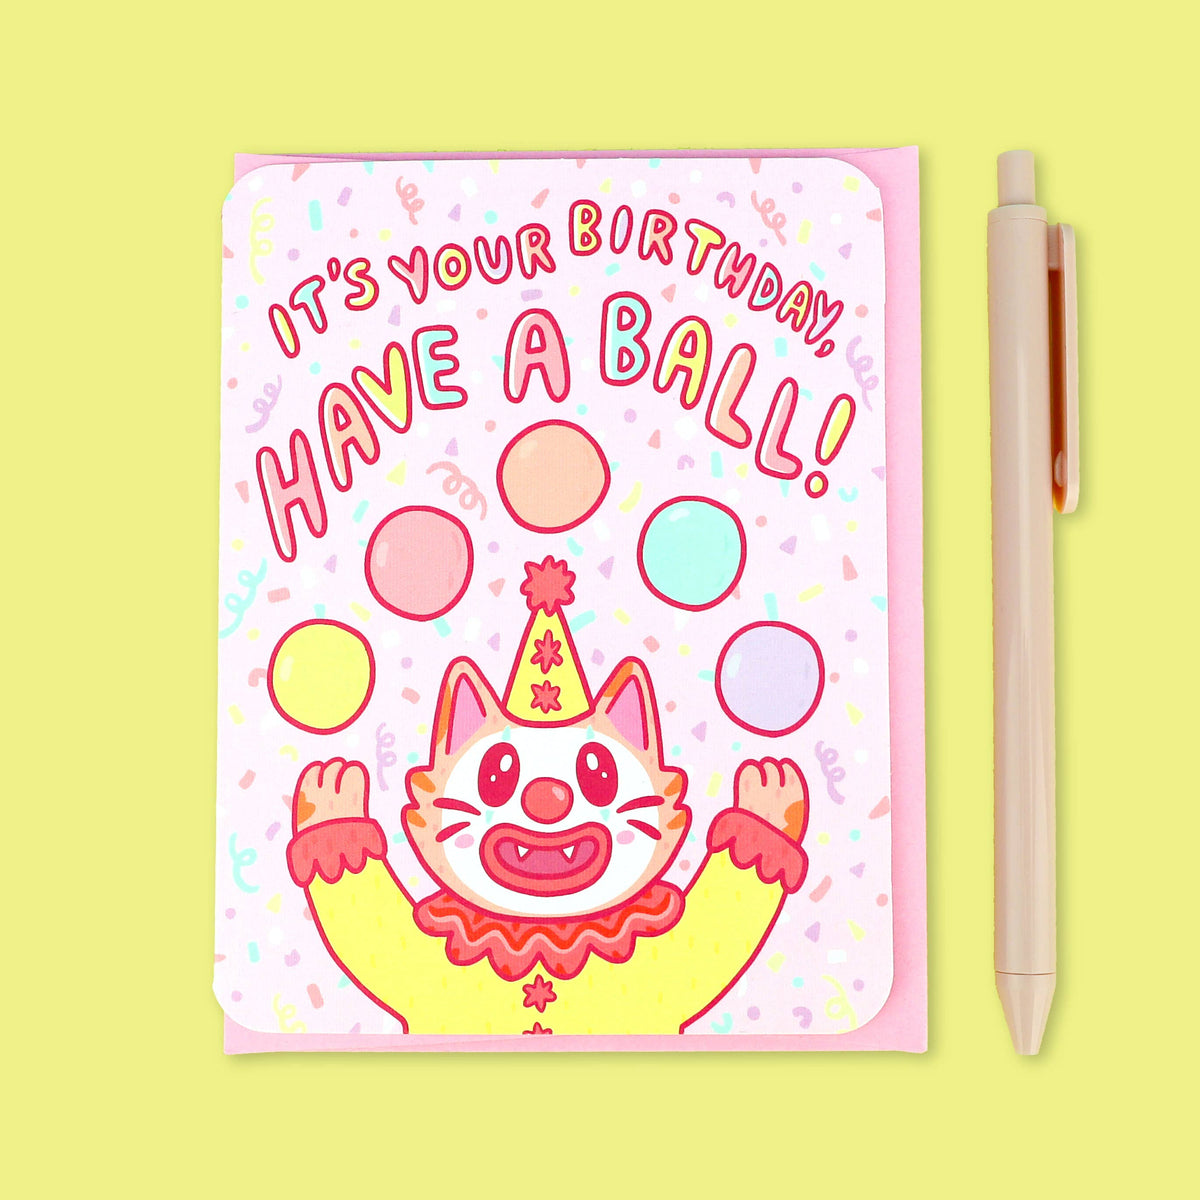 Have a Ball Clown Cat Birthday Greeting Card